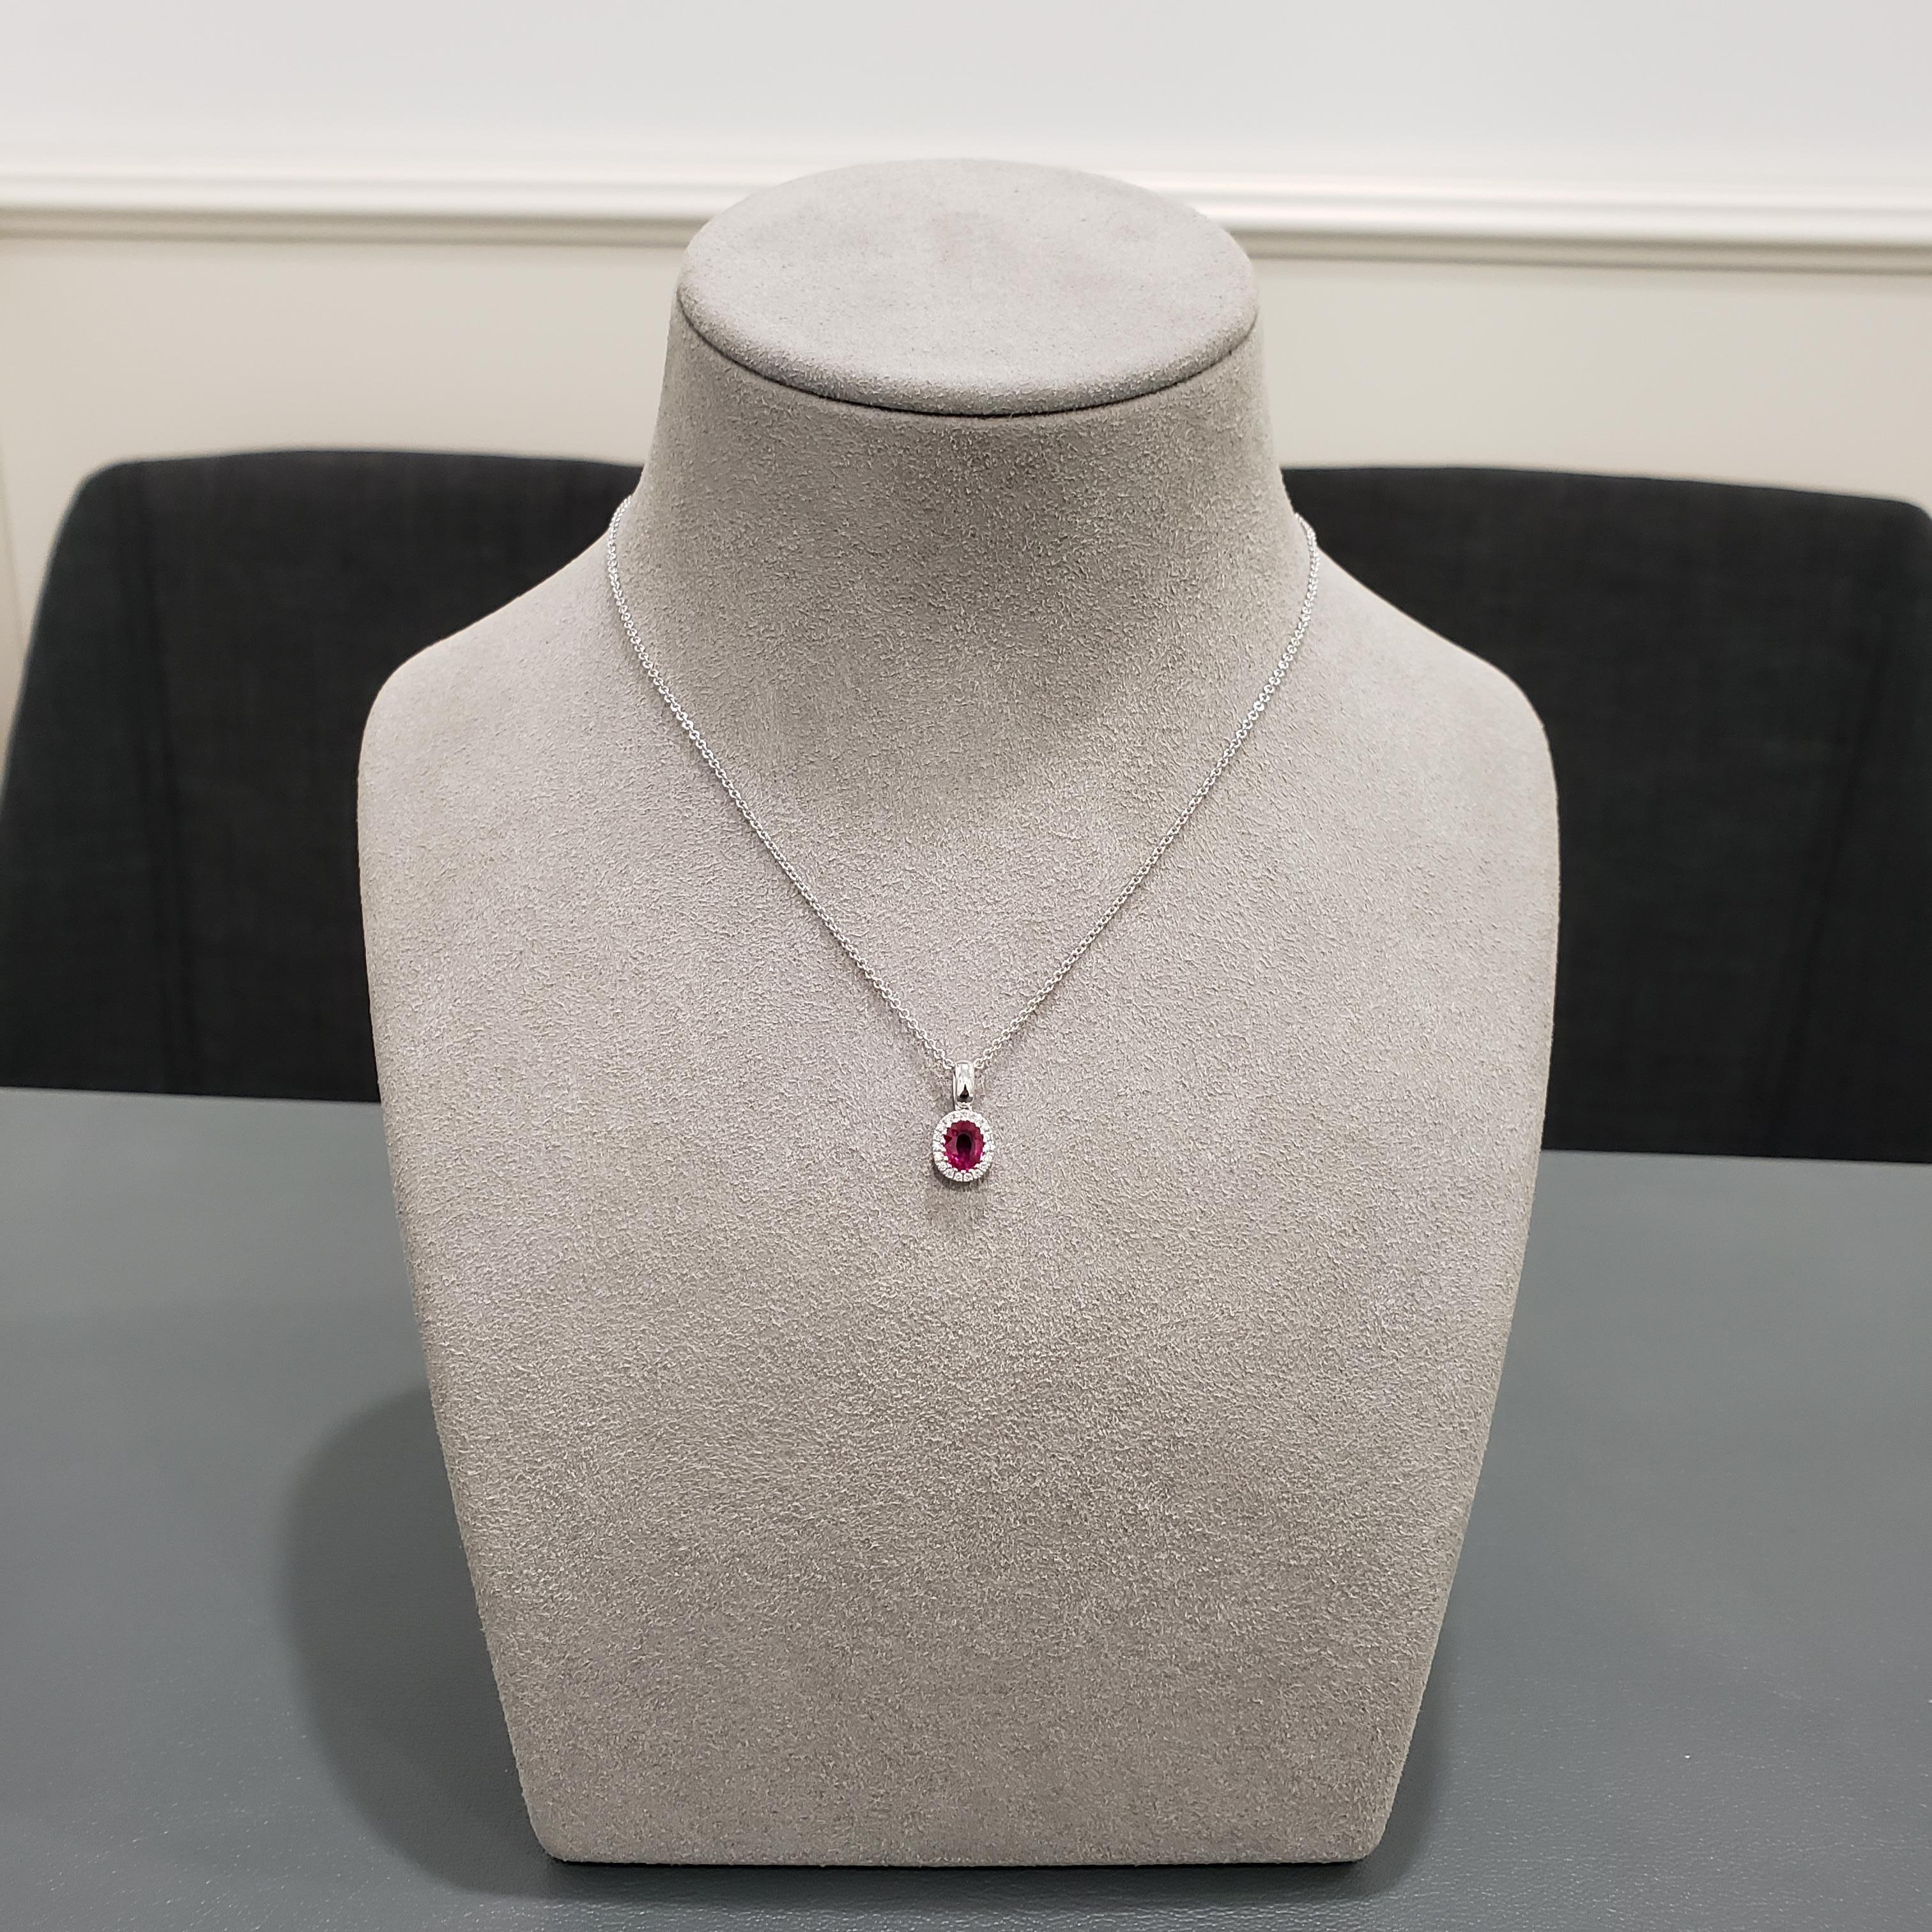 A floral motif pendant necklace showcasing a 0.70 carat oval ruby, surrounded by a single row of round brilliant diamonds. Made in 18K White Gold, Suspended on a 16 inch white gold chain. 

Style available in different price ranges. Prices are based